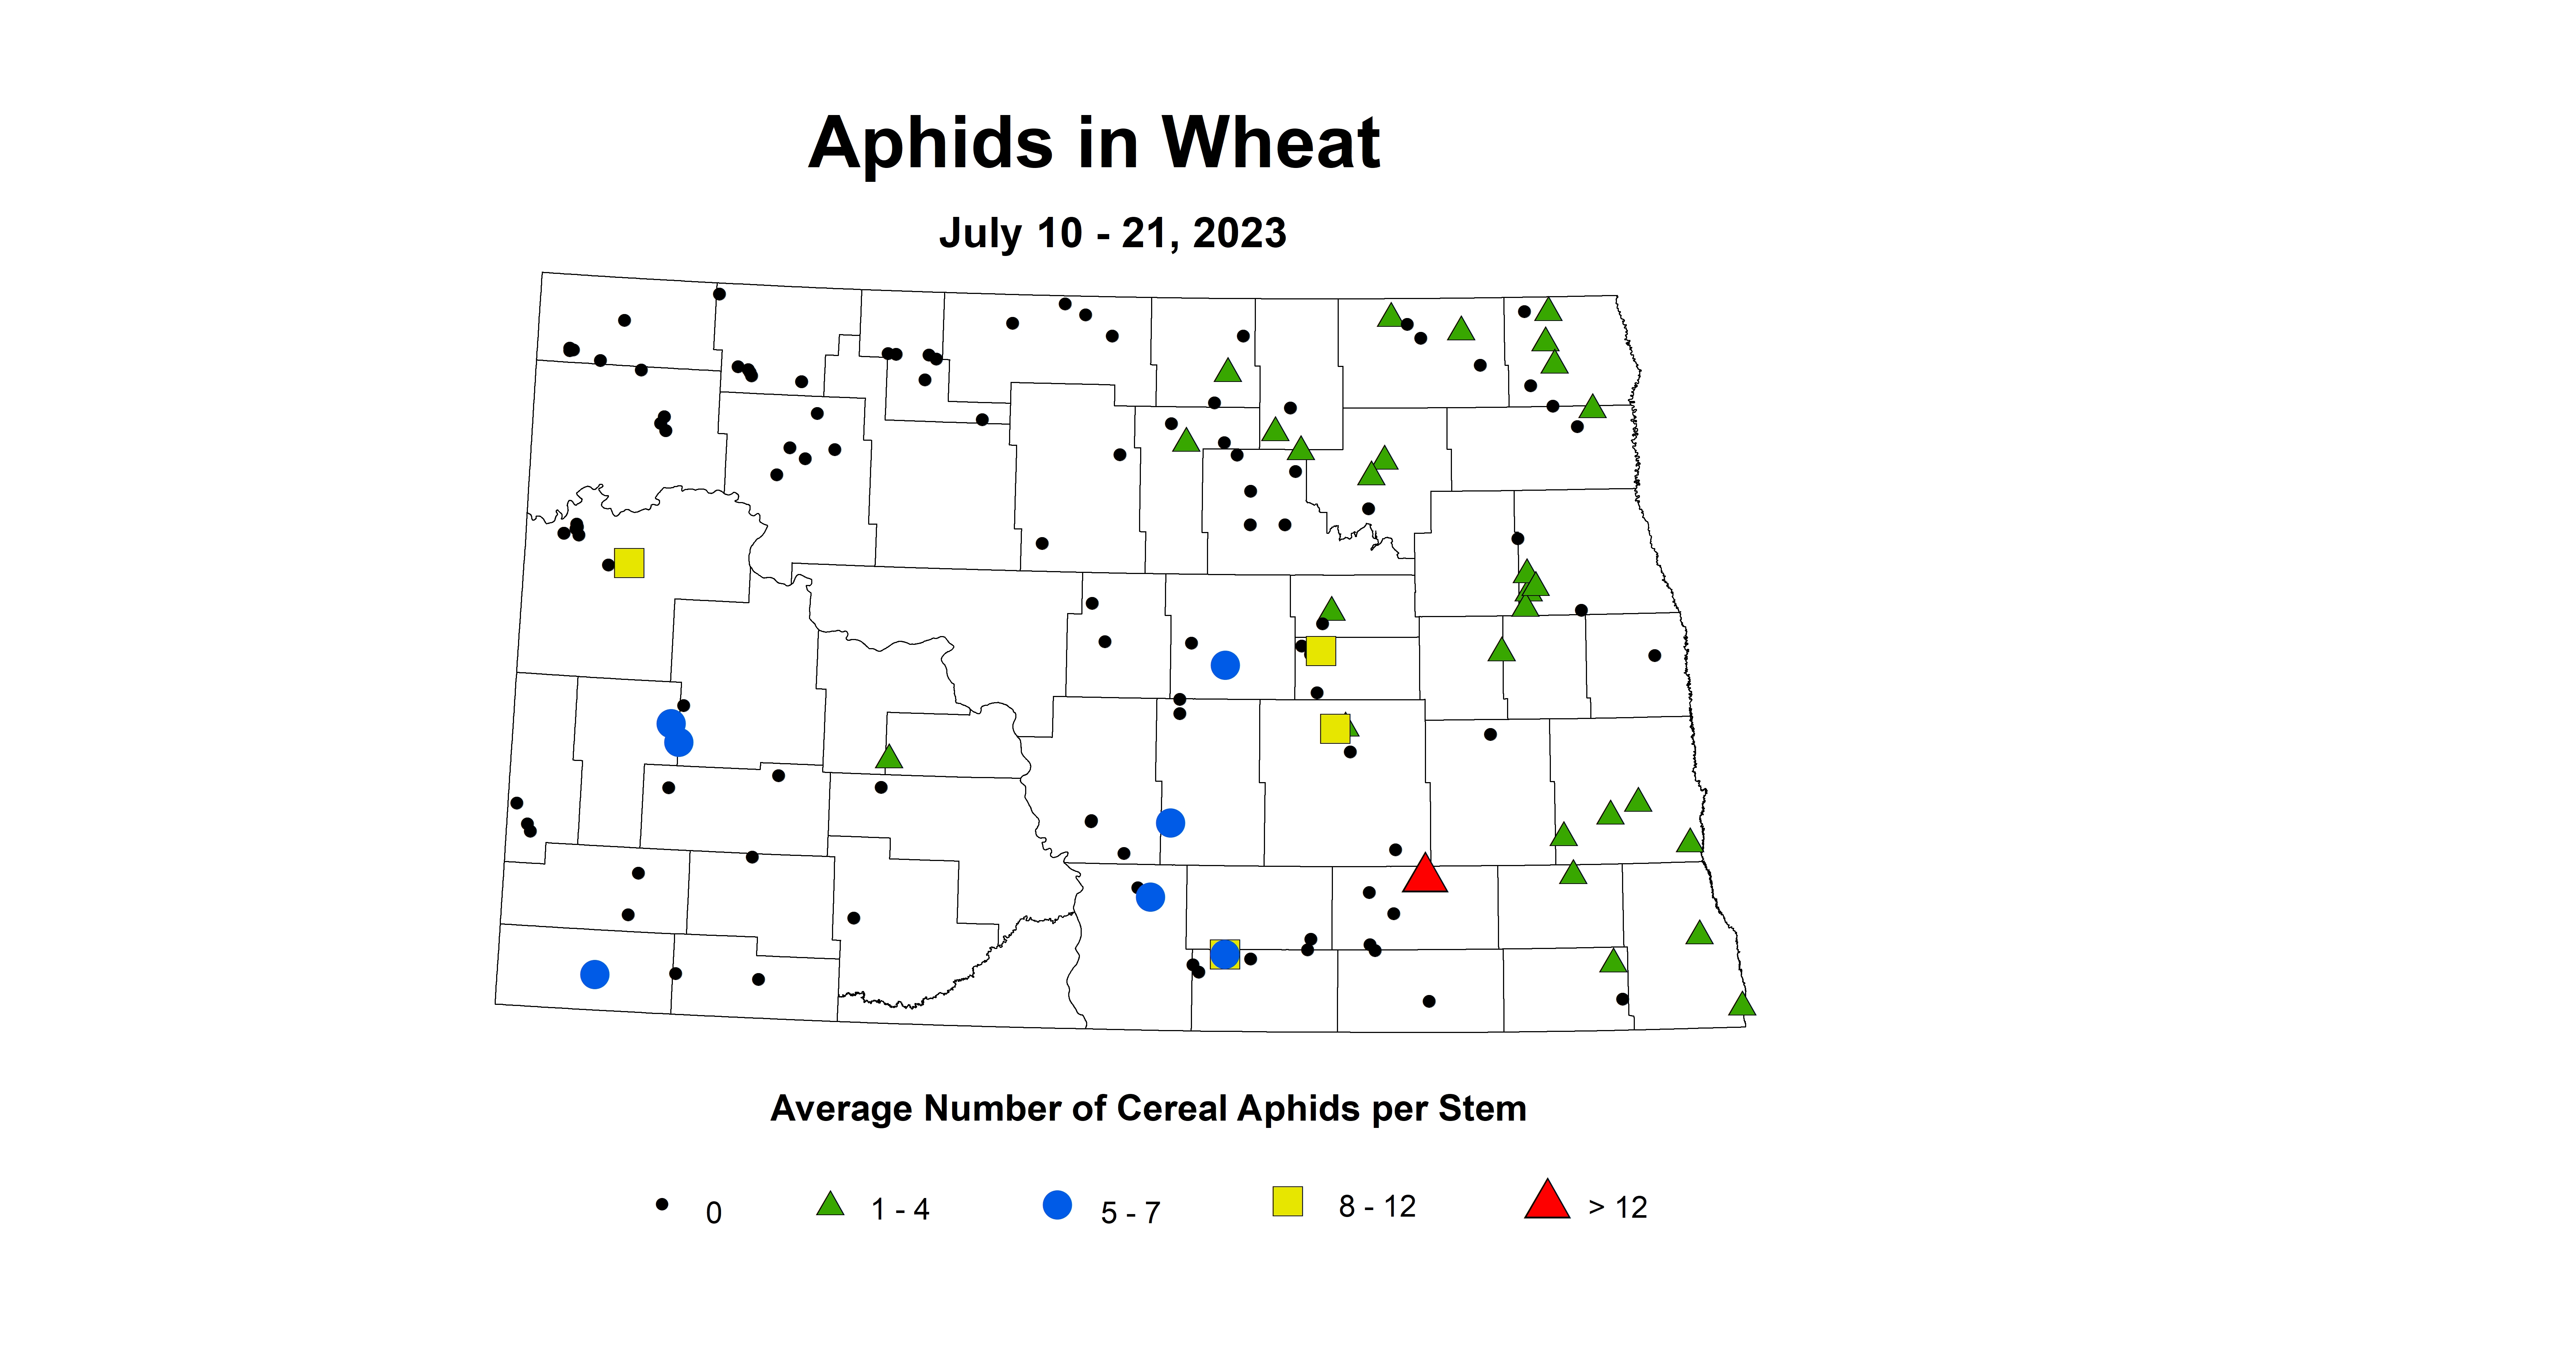 wheat aphids July 10-21 2023